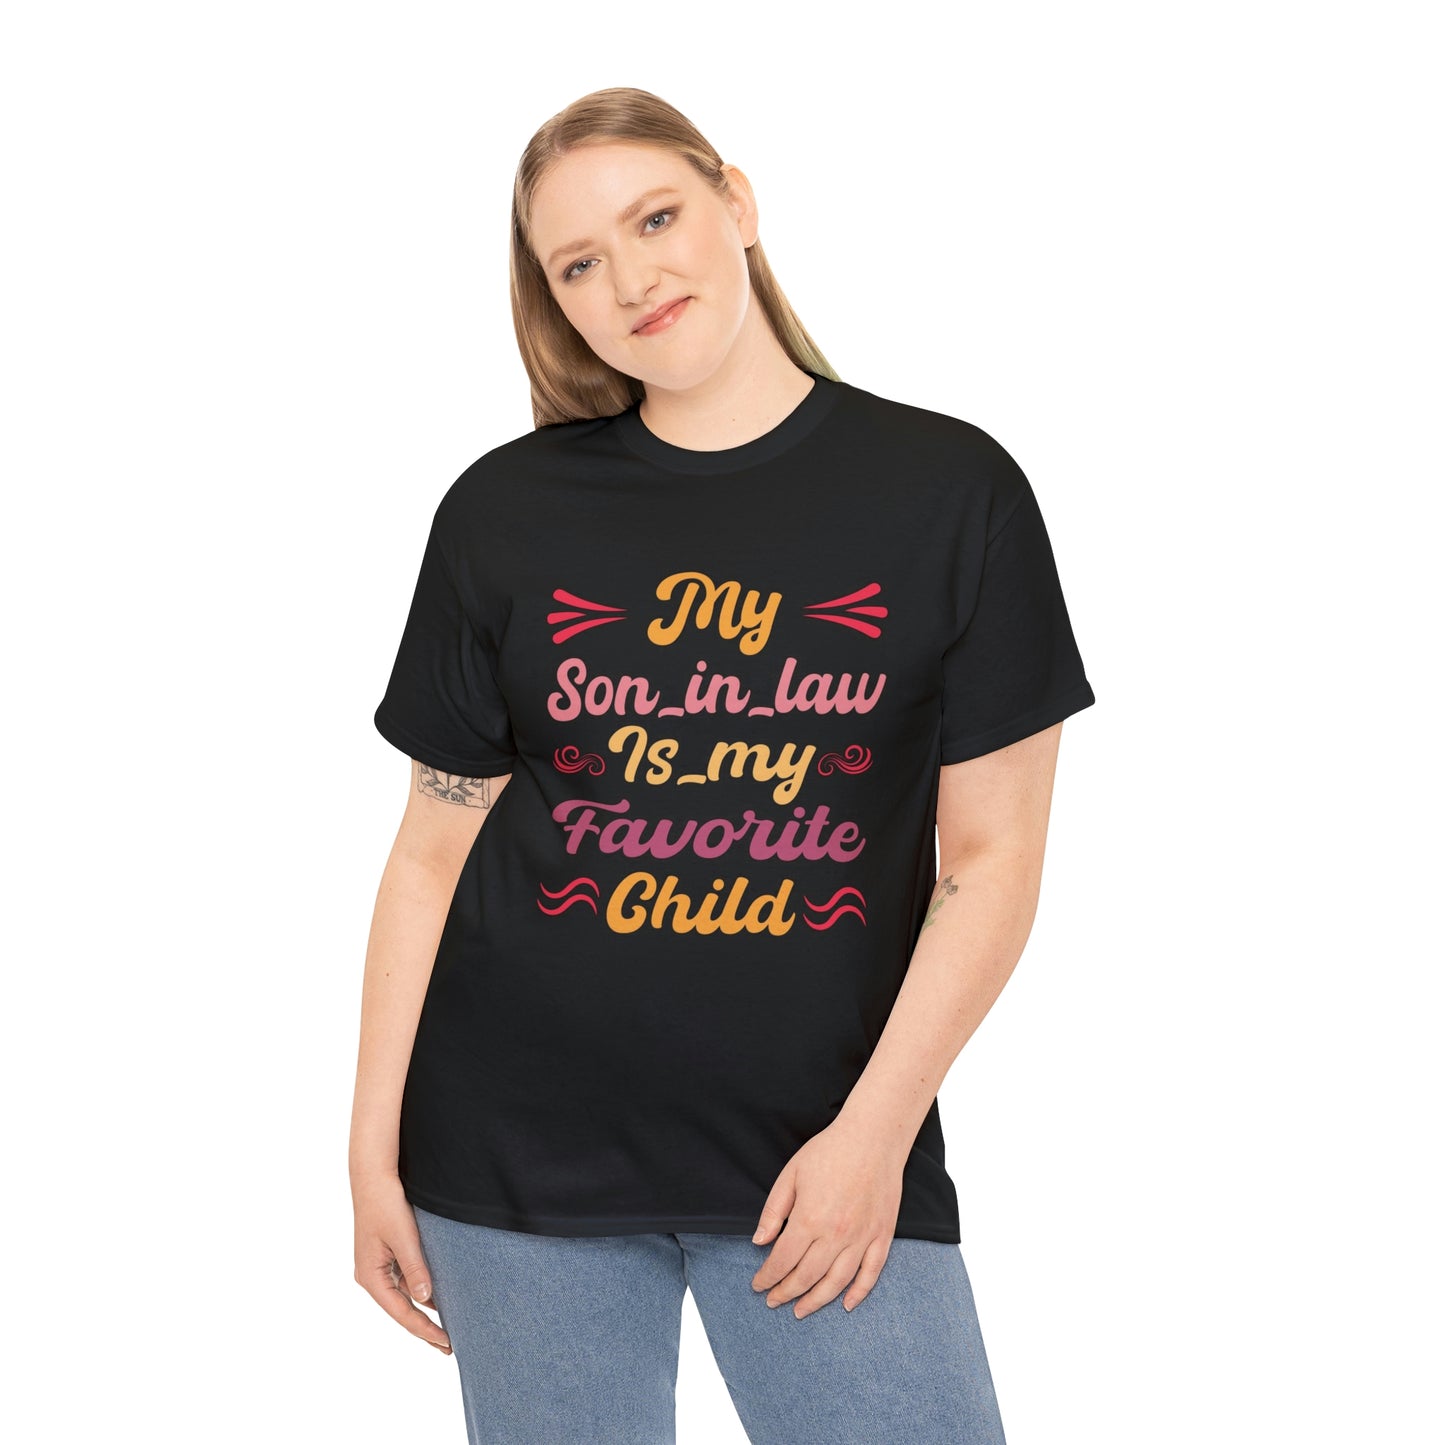 My son in law is favorite child- Heavy Cotton Tee